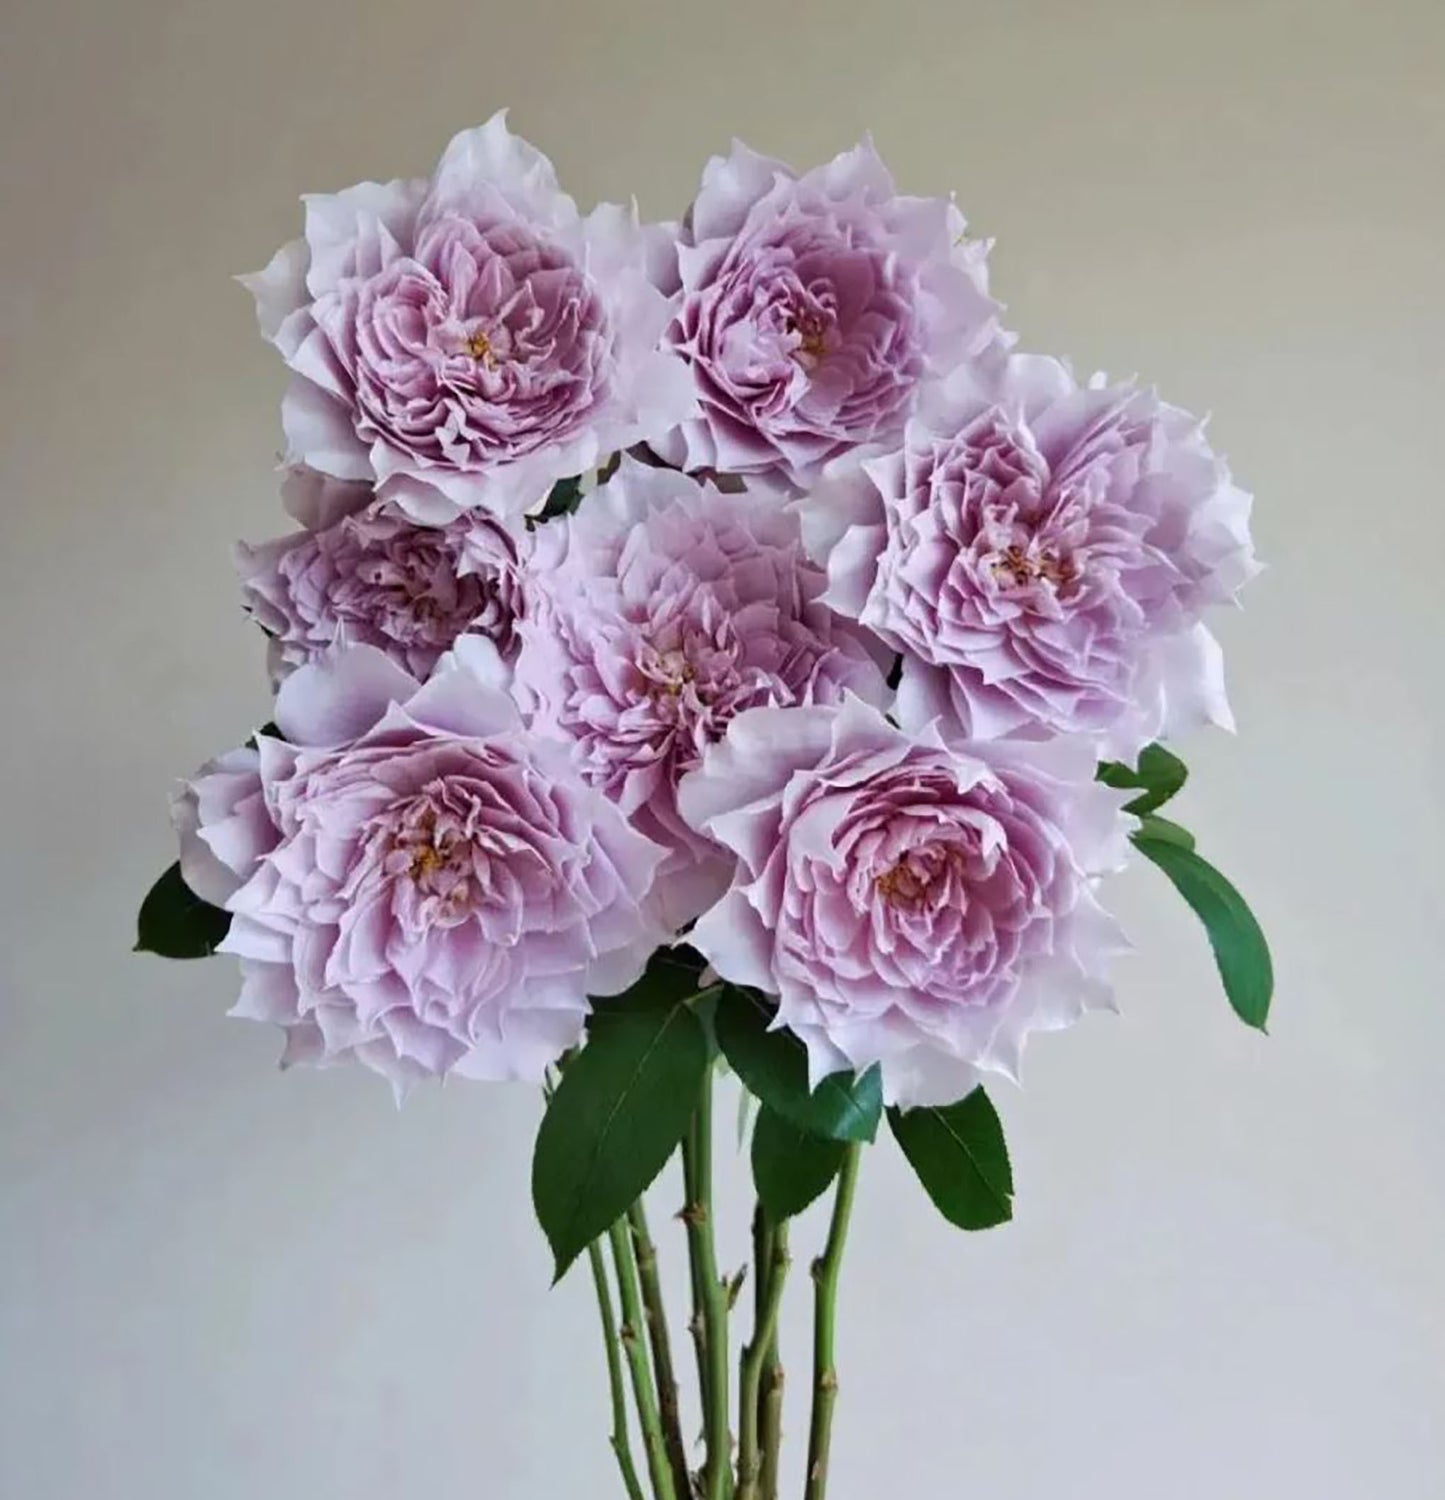 Dreamy Violet 幻紫, Shrub Rose, 2 Years Old 1 Gal, Non-Grafted/Own Root.